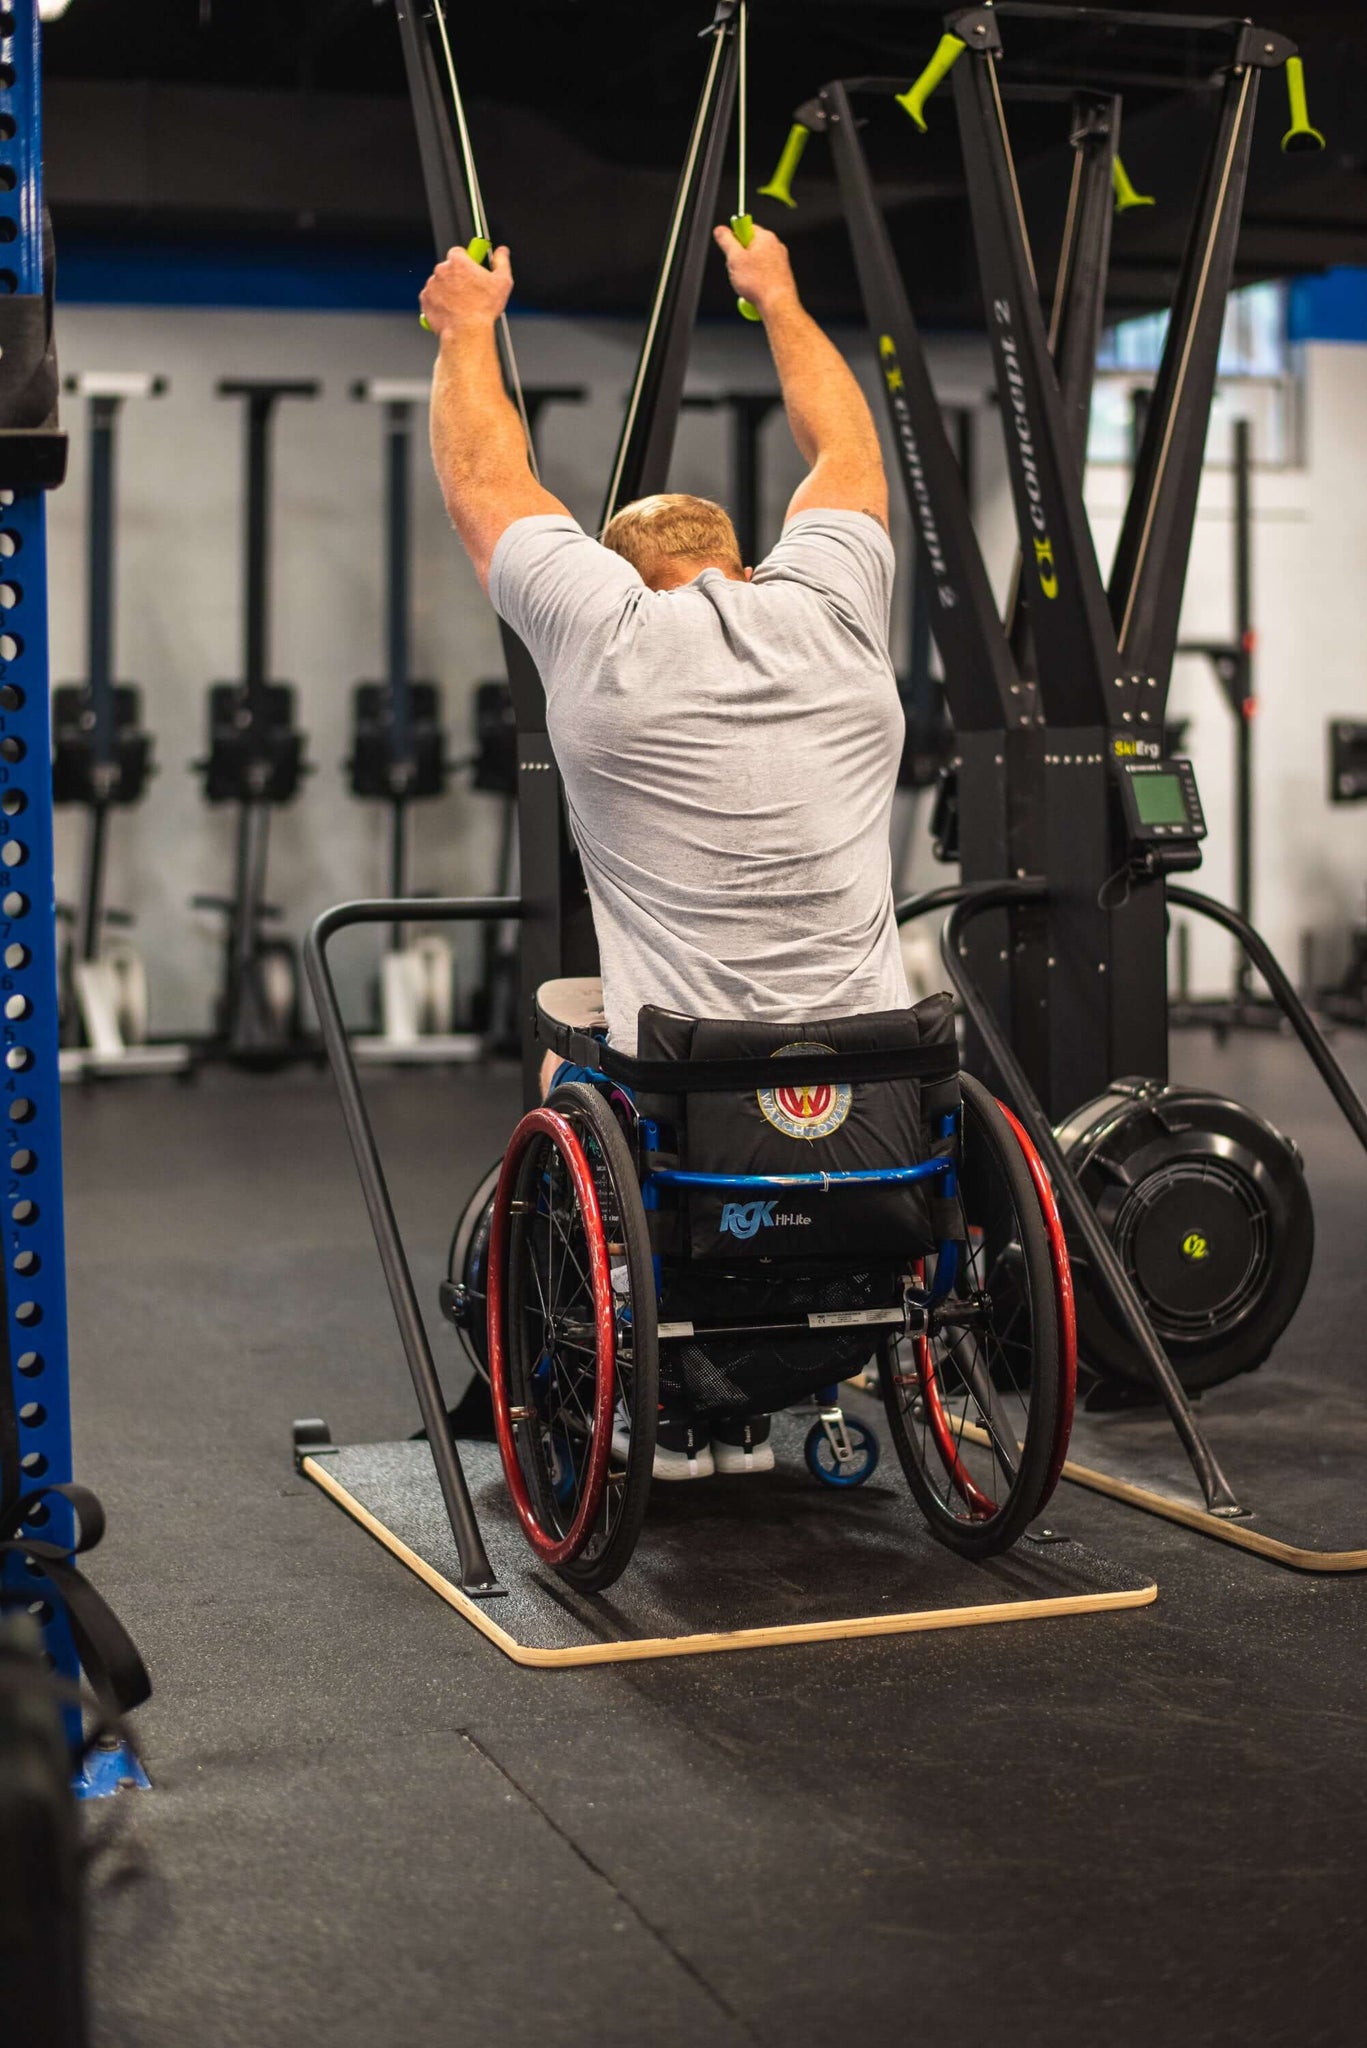 Wheelchair Athlete Kevin Ogar Using a Concept2 Ski Erg with his back facing you in a gym setting equip wider base